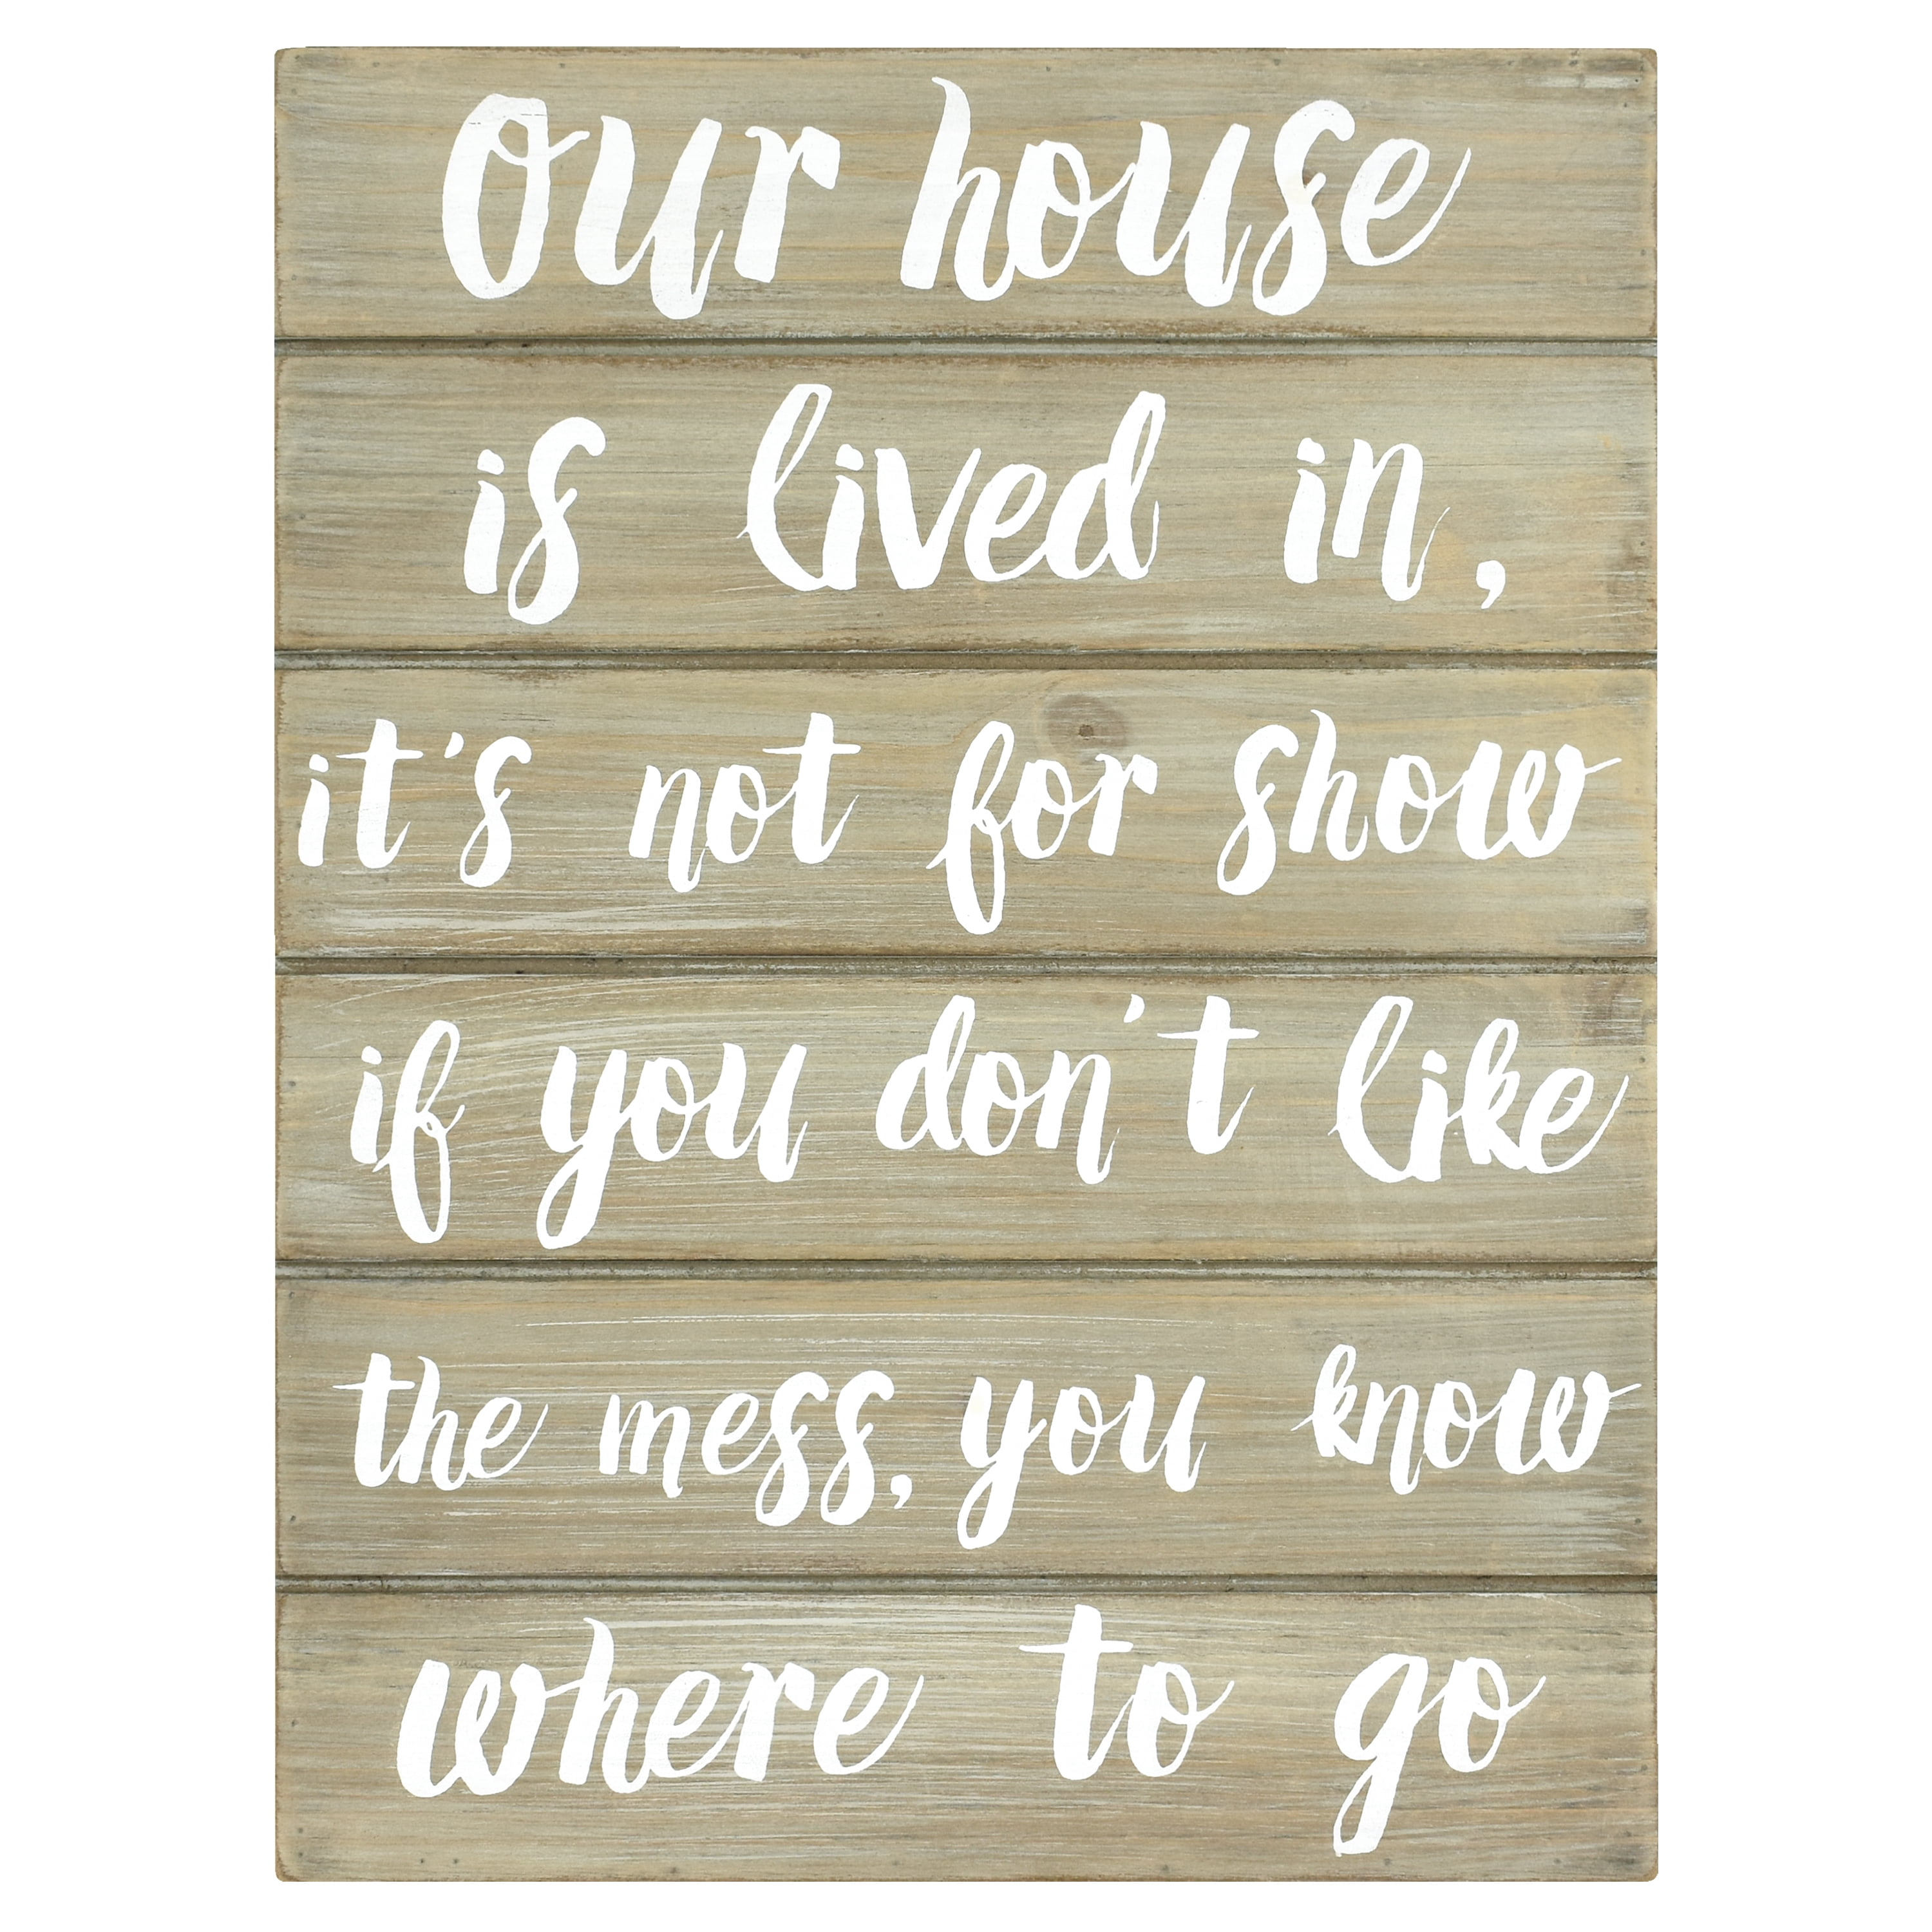 "OUR HOUSE IS LIVED IN ITS NOT FOR SHOW DONT LIKE THE MESS..... Home Decor sign